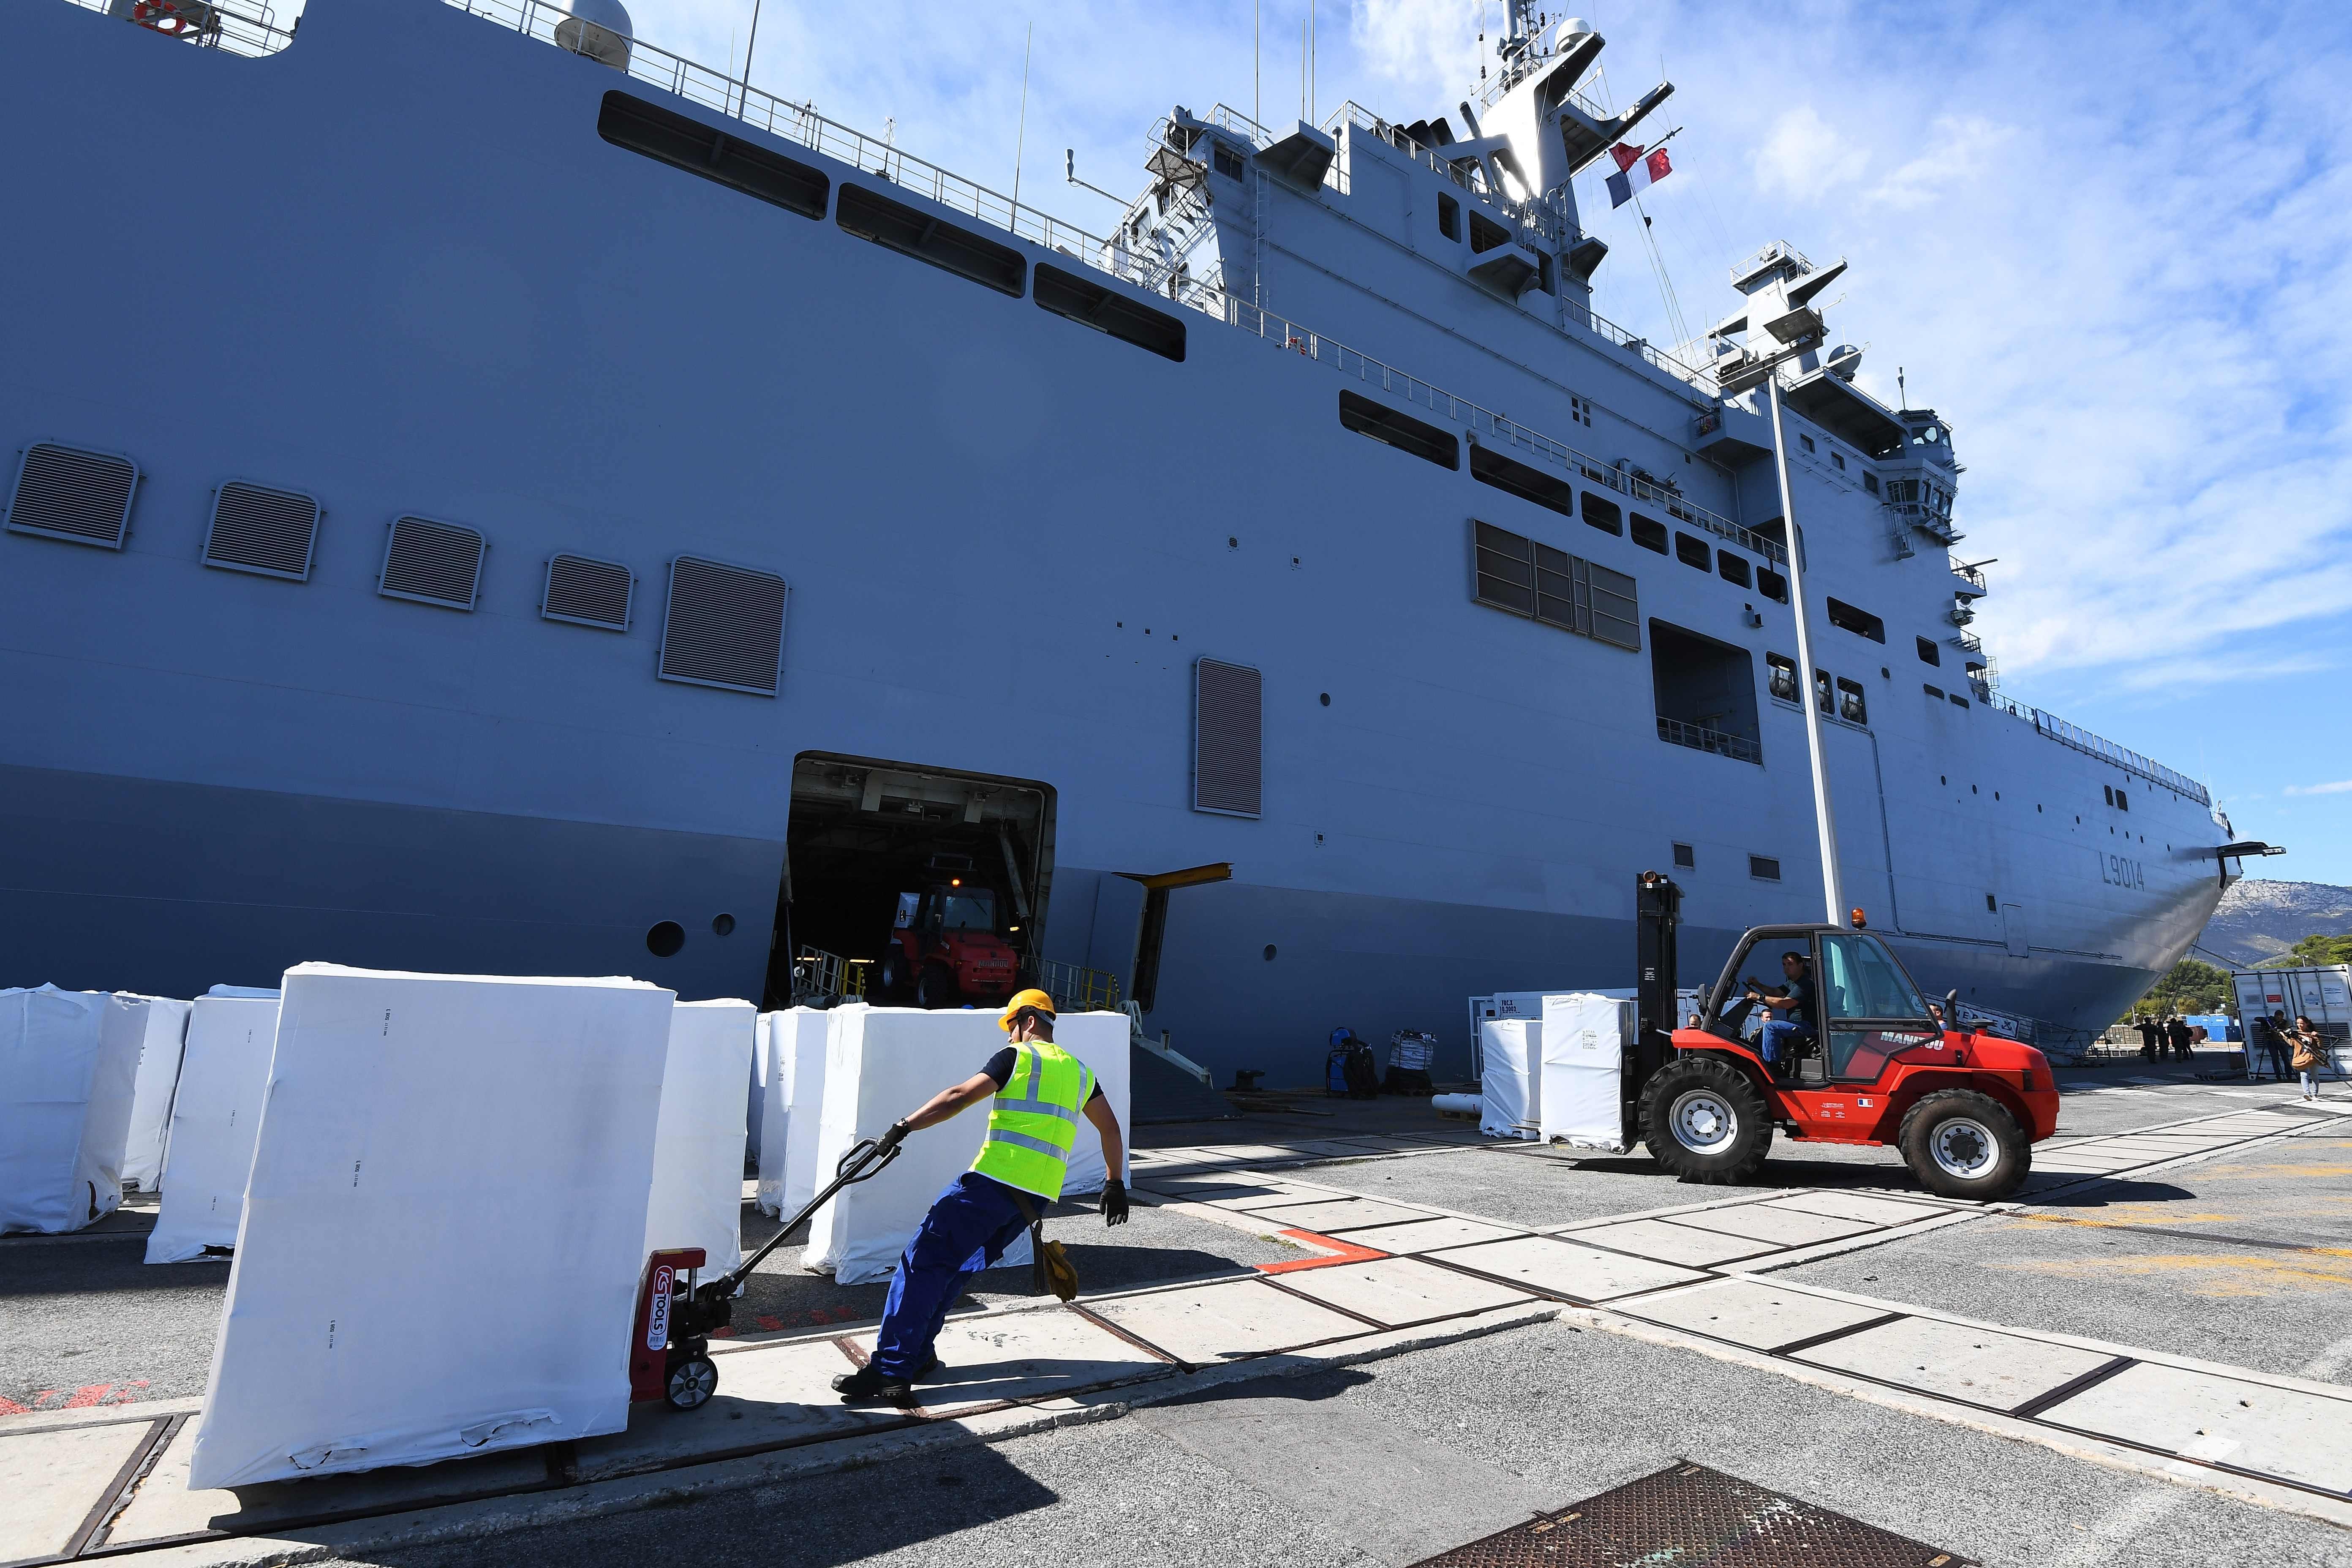 Members of the French navy load reconstruction and assistance equipment on the BPC Tonnerre, at the naval base in Toulon on September 11, 2017, on the eve of its departure to the French Caribbean islands to reinforce the rescue after the passage of Hurricane Irma. Britain, France, the Netherlands and the United States have ramped up relief efforts for their territories in the Caribbean. Photo: AFP